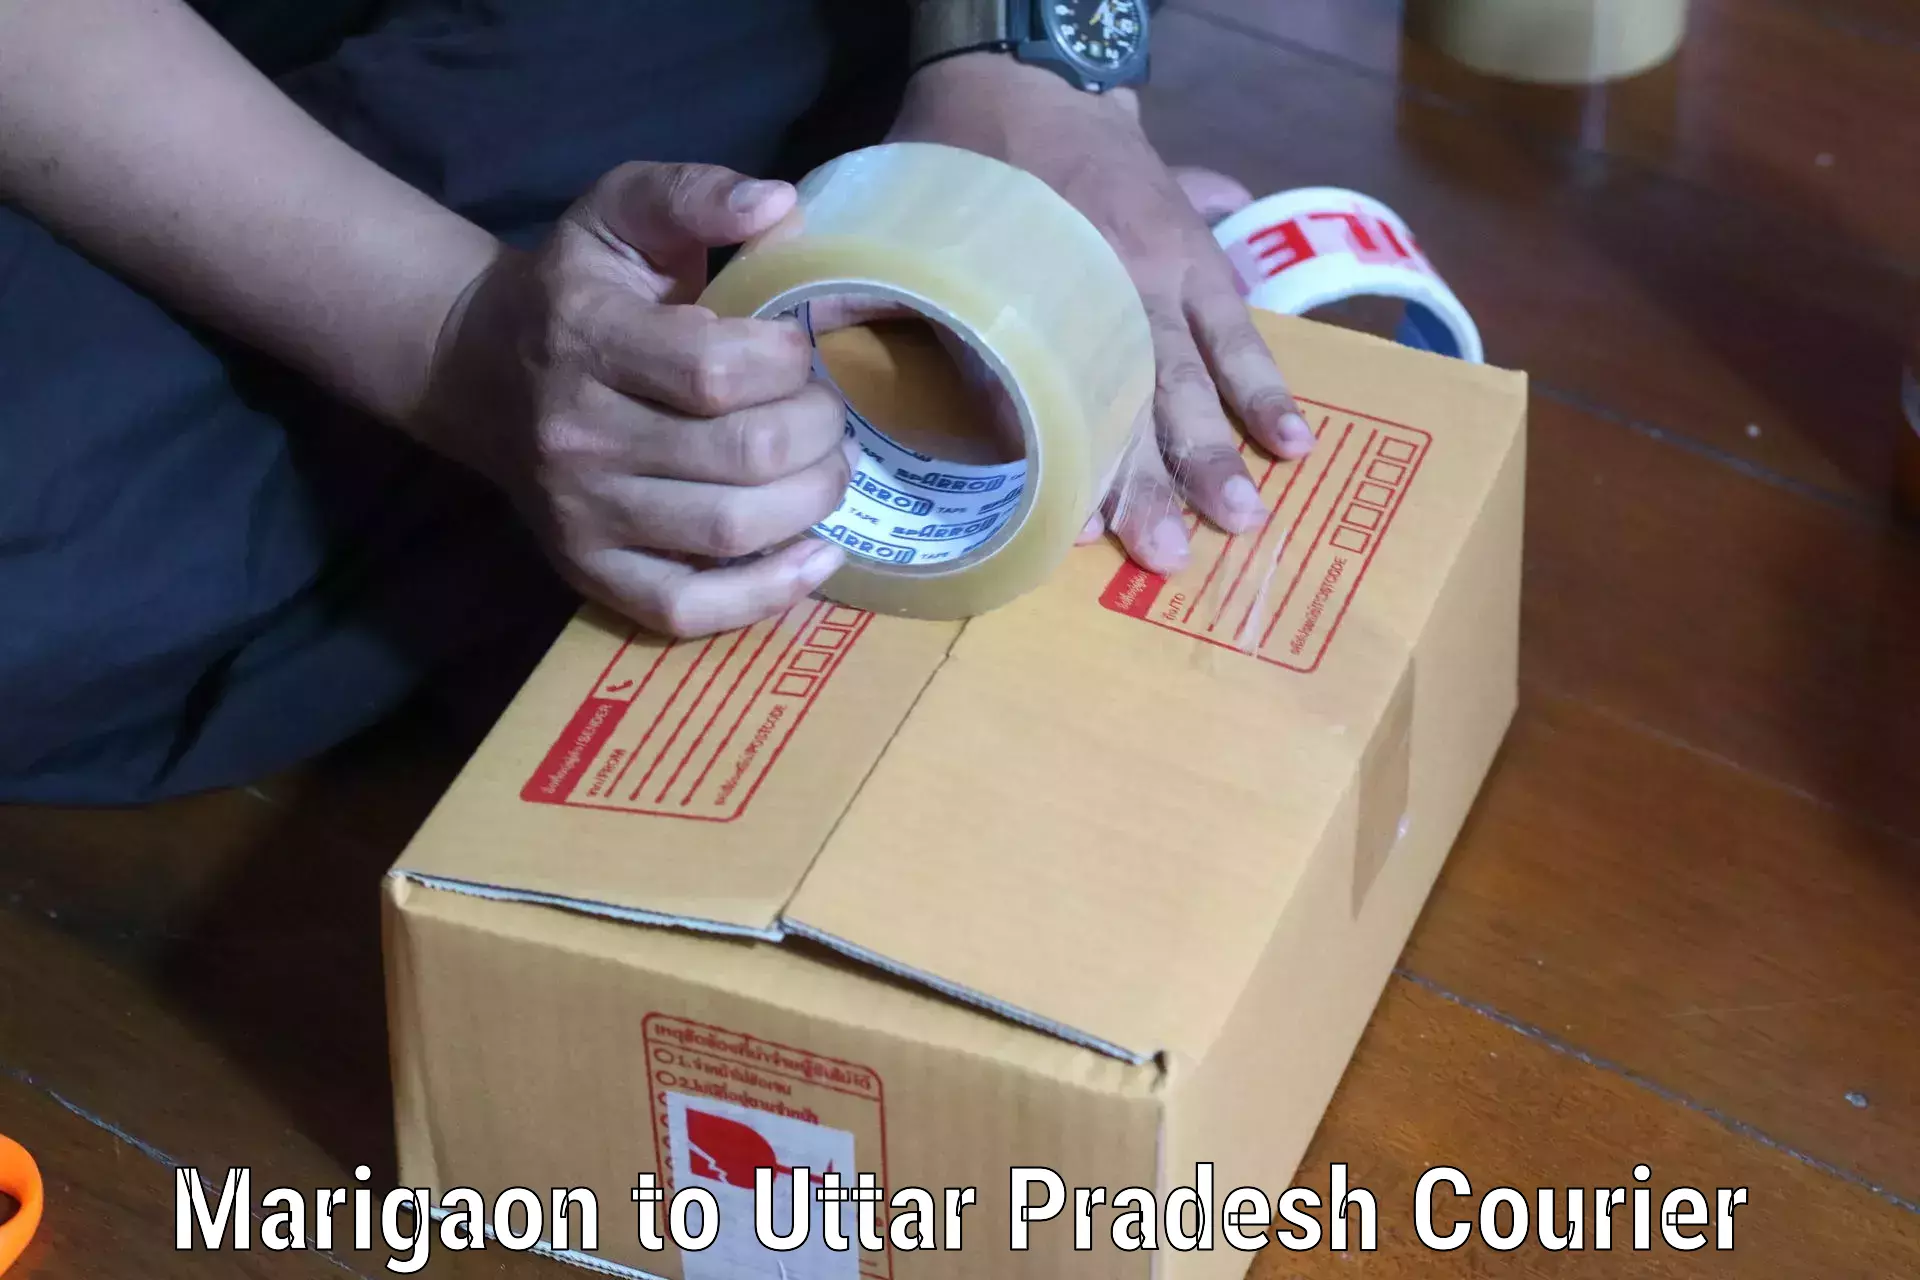 Efficient parcel tracking Marigaon to Ghaziabad